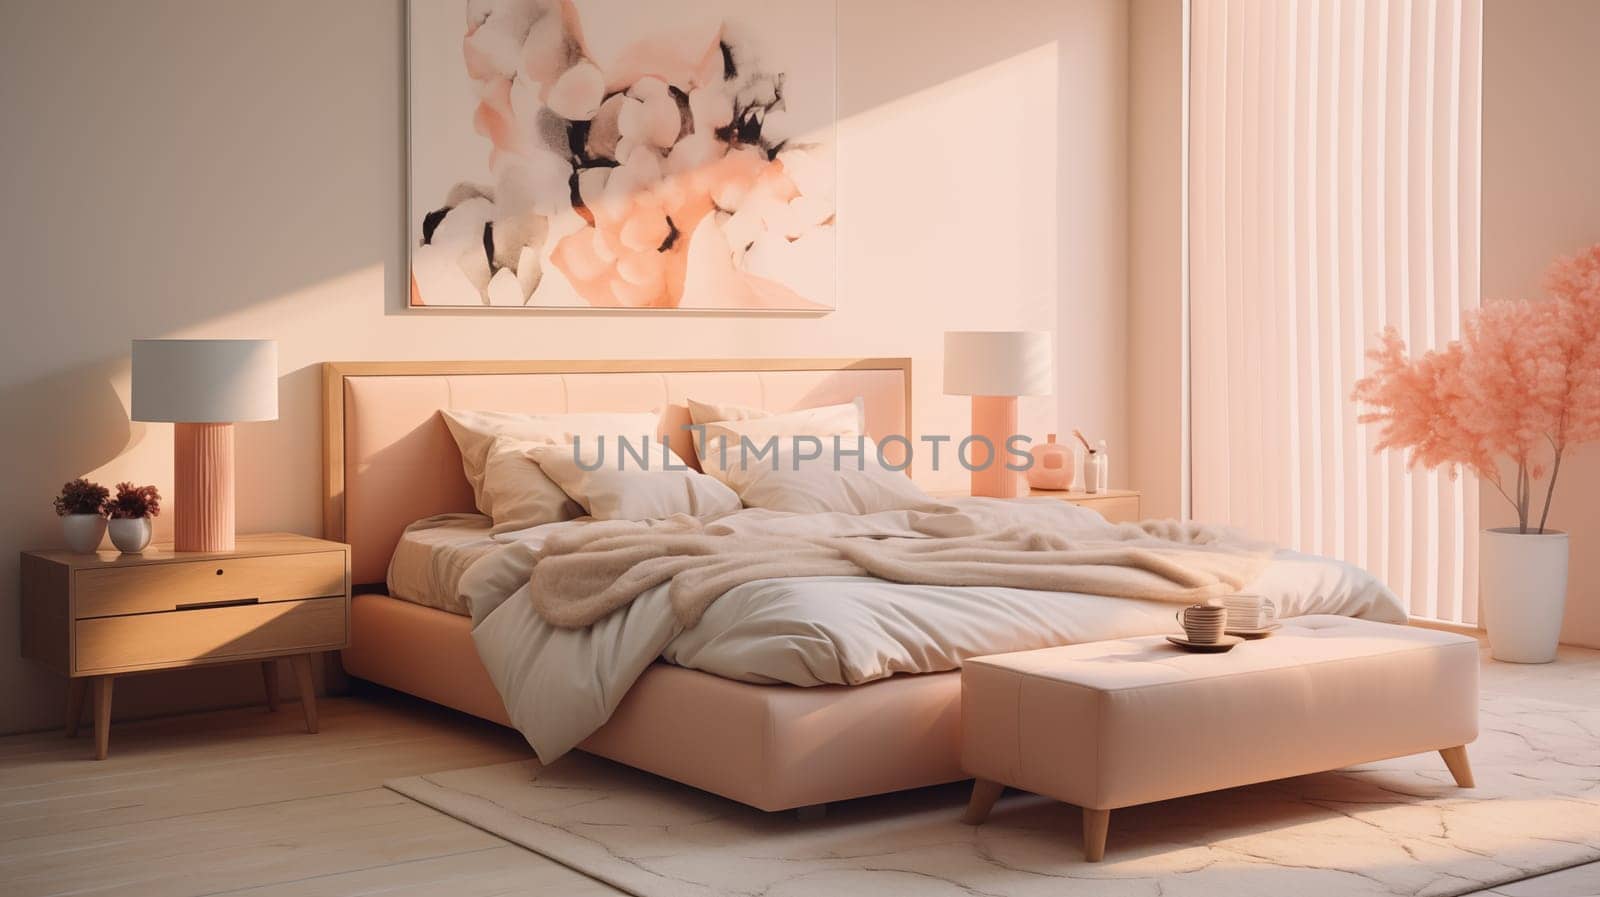 Inviting light-peach-color bedroom with soft blush tones, elegant decor, and abstract canvas art in morning light.